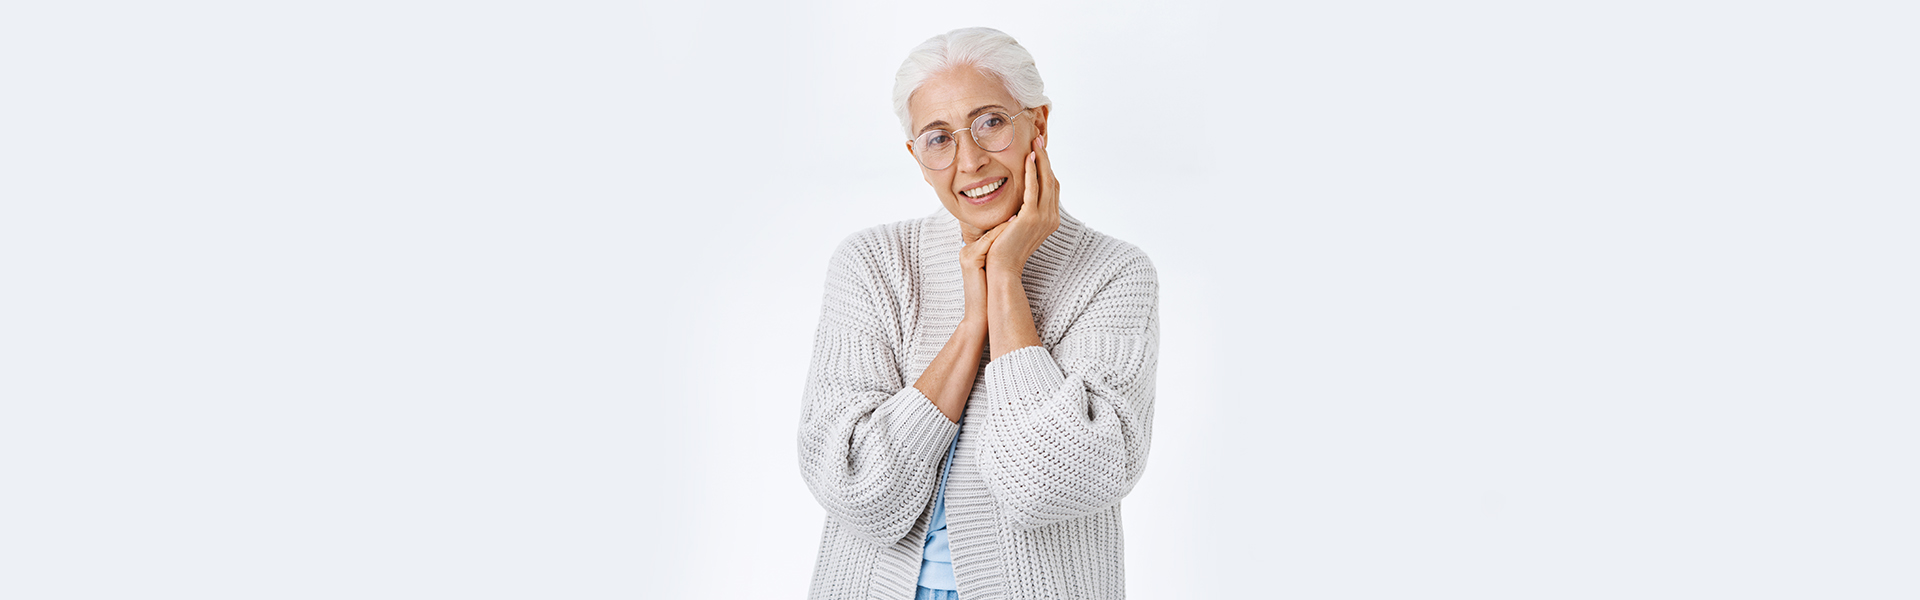 7 Tips to Follow to Extend the Life of Your Dentures